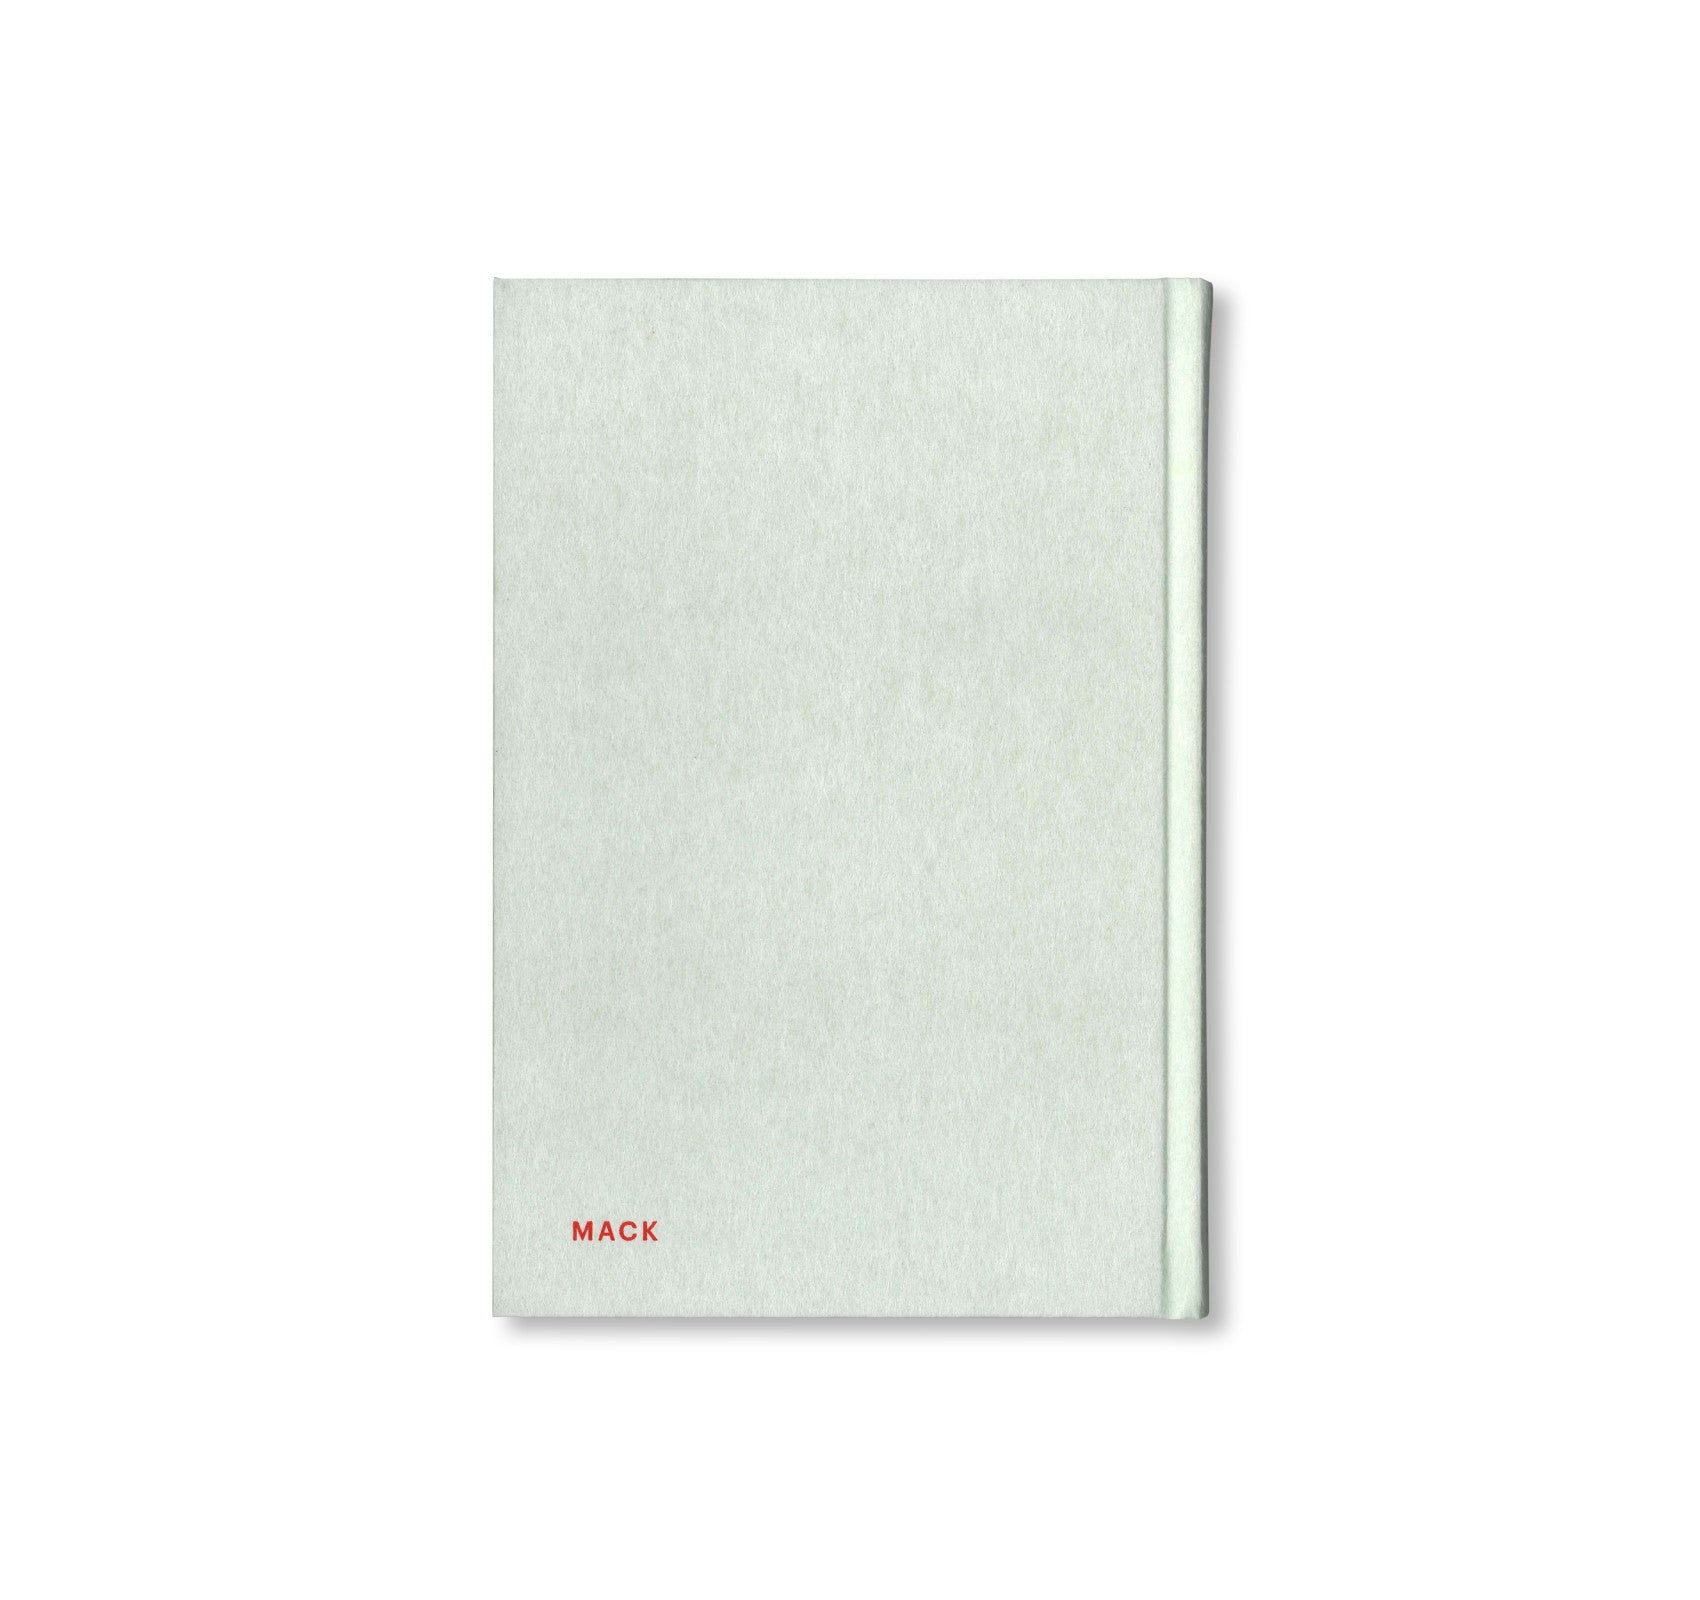 THE NARCISSISTIC CITY NOTEBOOK by Takashi Homma